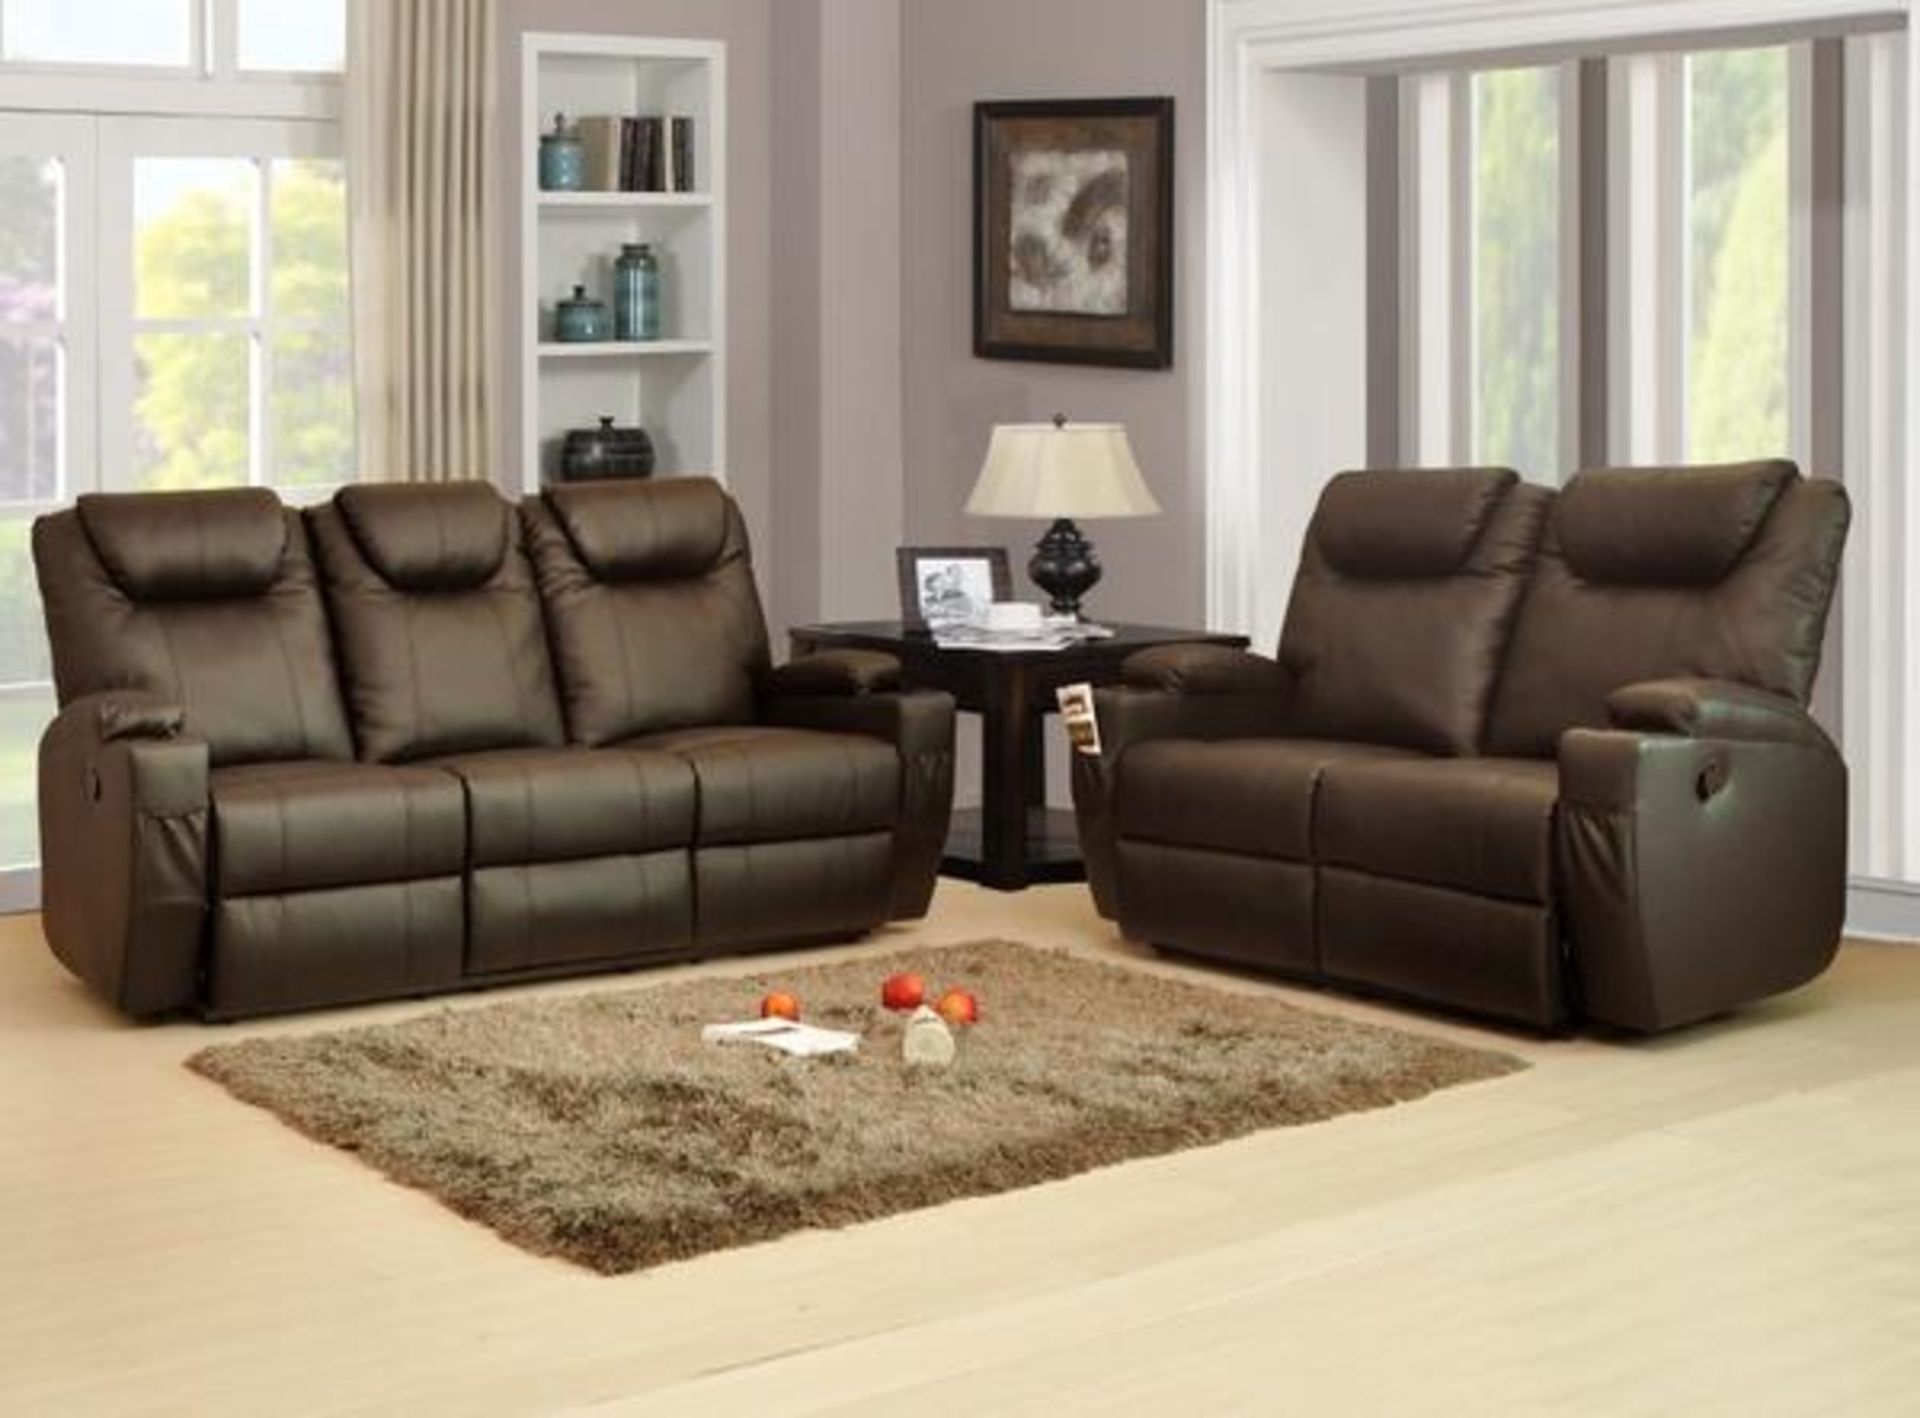 Brand New Boxed 3 Seater Plus 2 Seater Lazyboy Brown Leather Electric Reclining Sofas